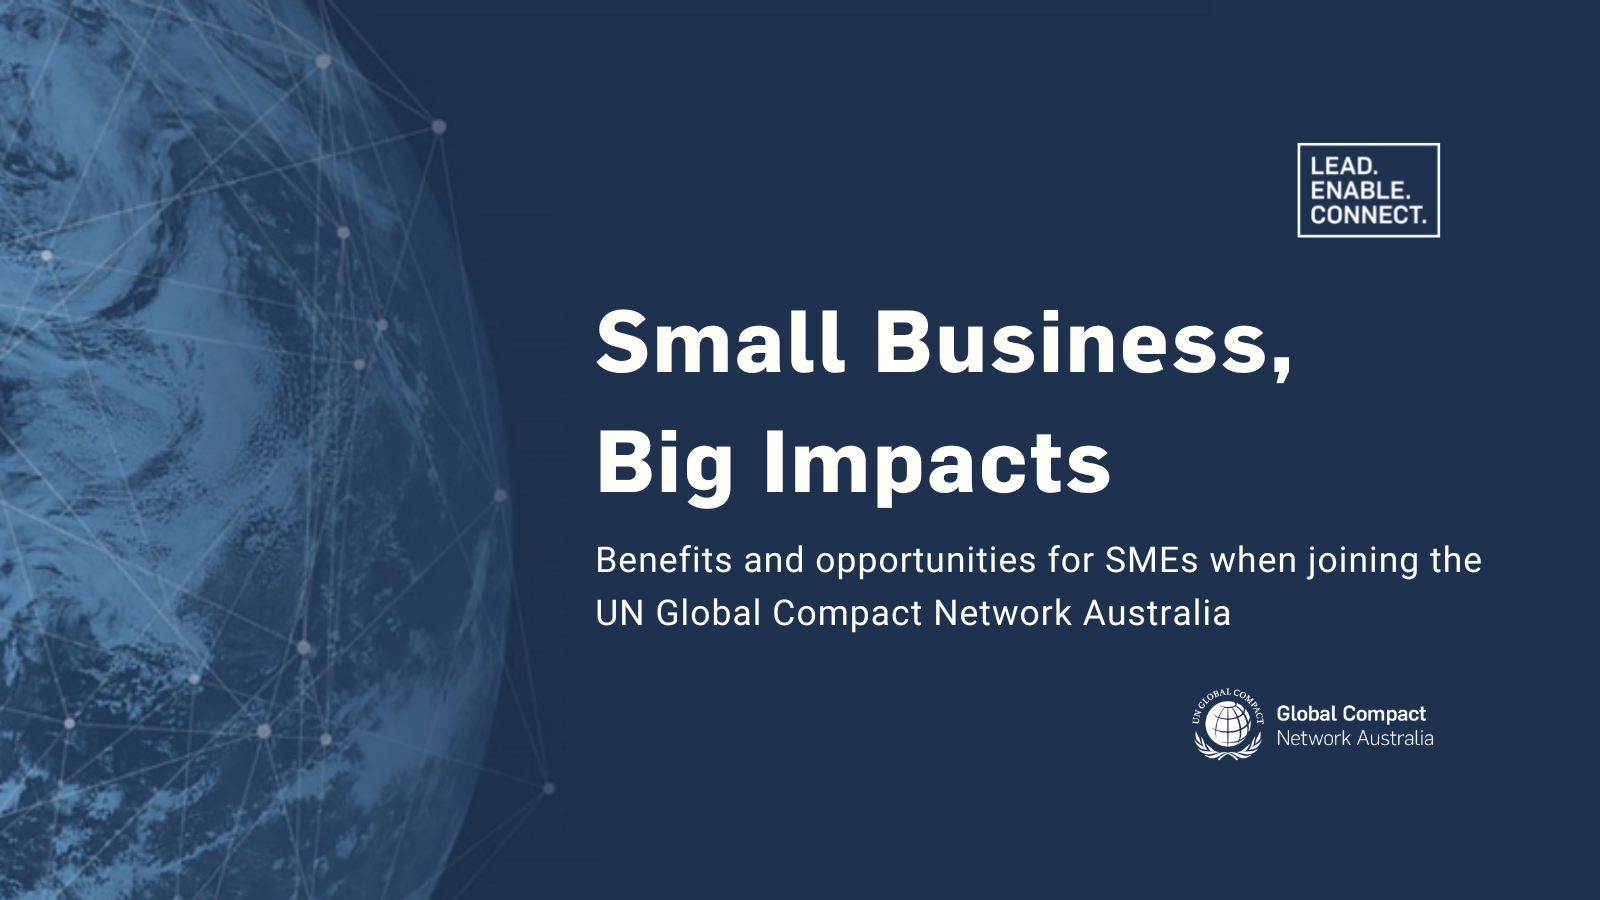 Small Business, Big Impacts: Benefits and opportunities for SMEs when joining the UN Global Compact Network Australia